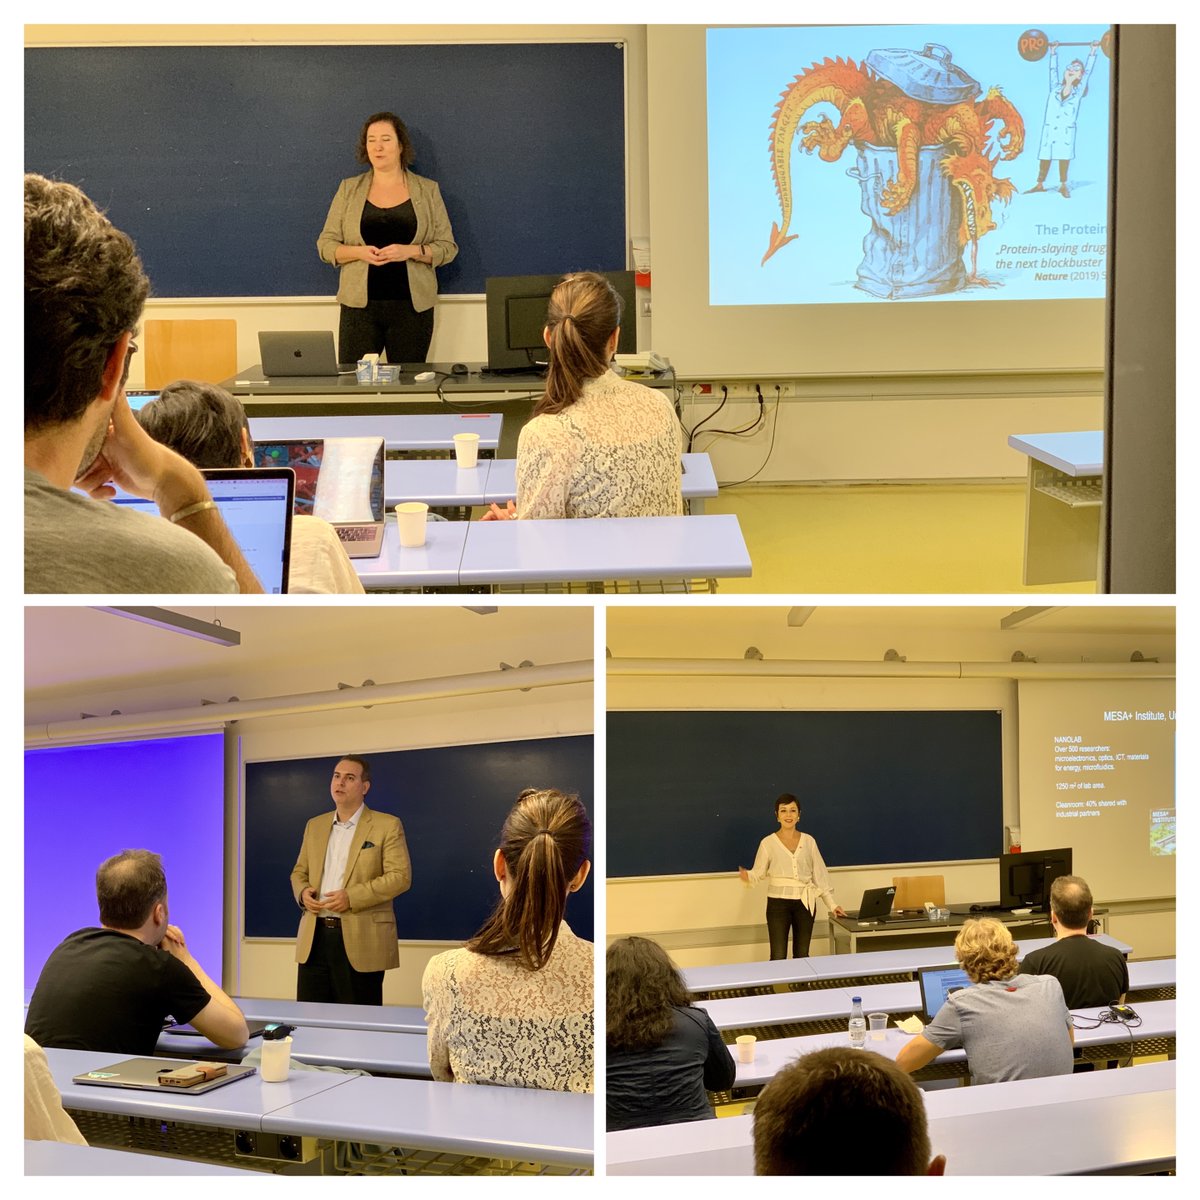 This morning also featured a special edition of our 10th anniversary series of research talks of our members. Many thanks to @m_gorna @fivanovicpg and @m3lab_ for their inspiring talks.